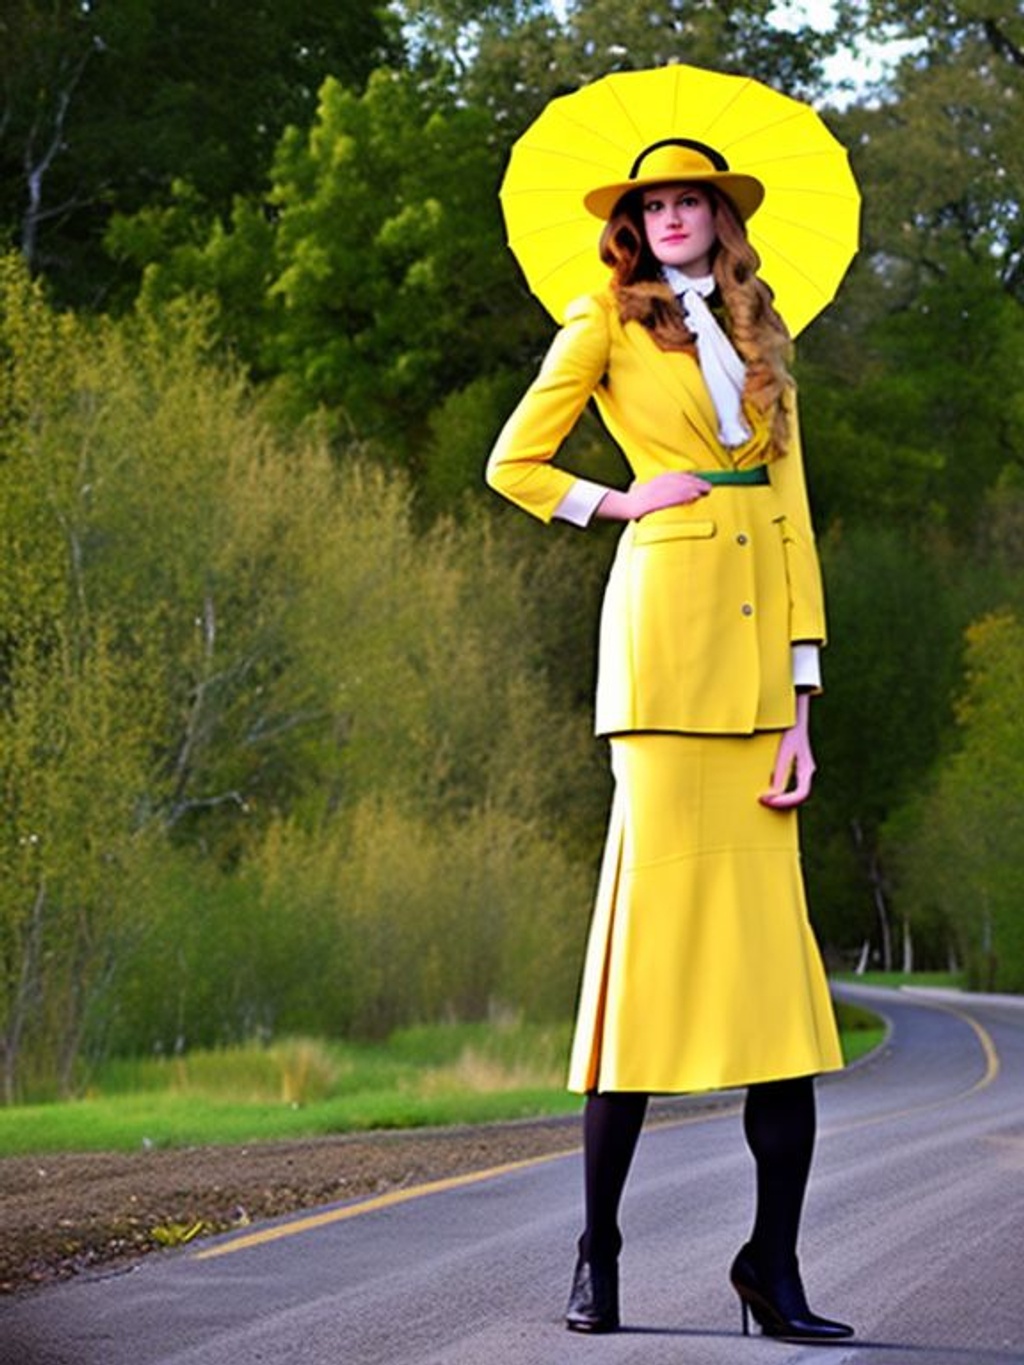 Prompt: A girl with a full yellow Victorian outfit, A yellow cartwheel hat, a yellow high-hip fitted blazer, a white shirt and yellow man-tailored tie, a belted yellow pencil skirt and sheer stockings, a yellow stiffed stole shoe, and half-tied long light brown hair bear a striking resemblance. Just like Jennifer Hale, a road, a landscape, a forest, Toei anime studio, post-apocalyptic sci-fi, Cyber Noir, HQ, 4k